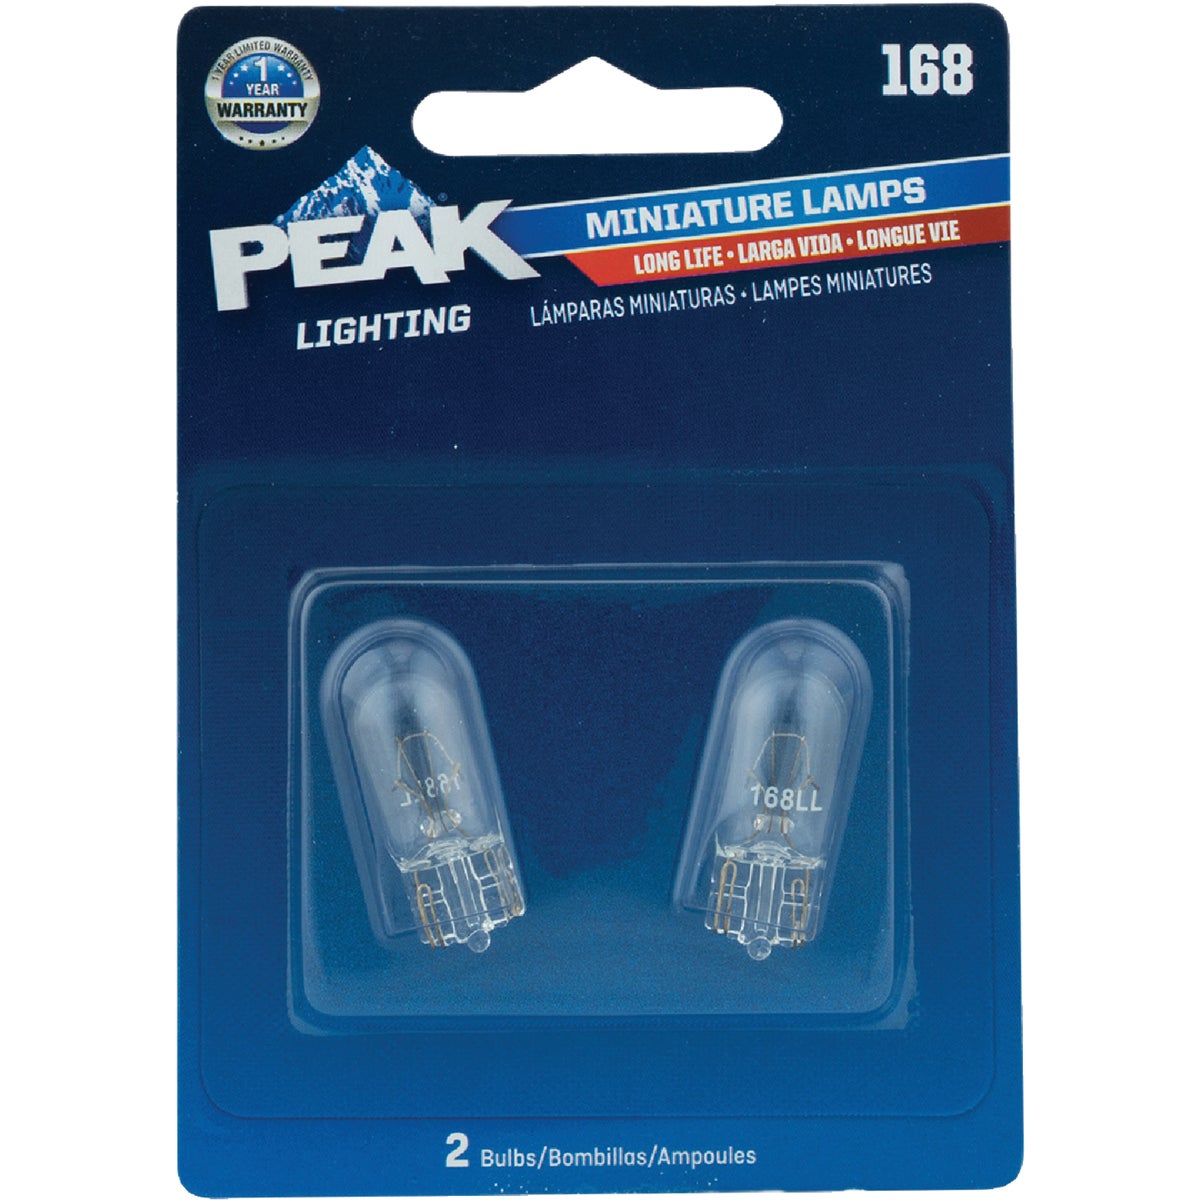 Item 583744, Save time and money by using PEAK Long Life lamps.